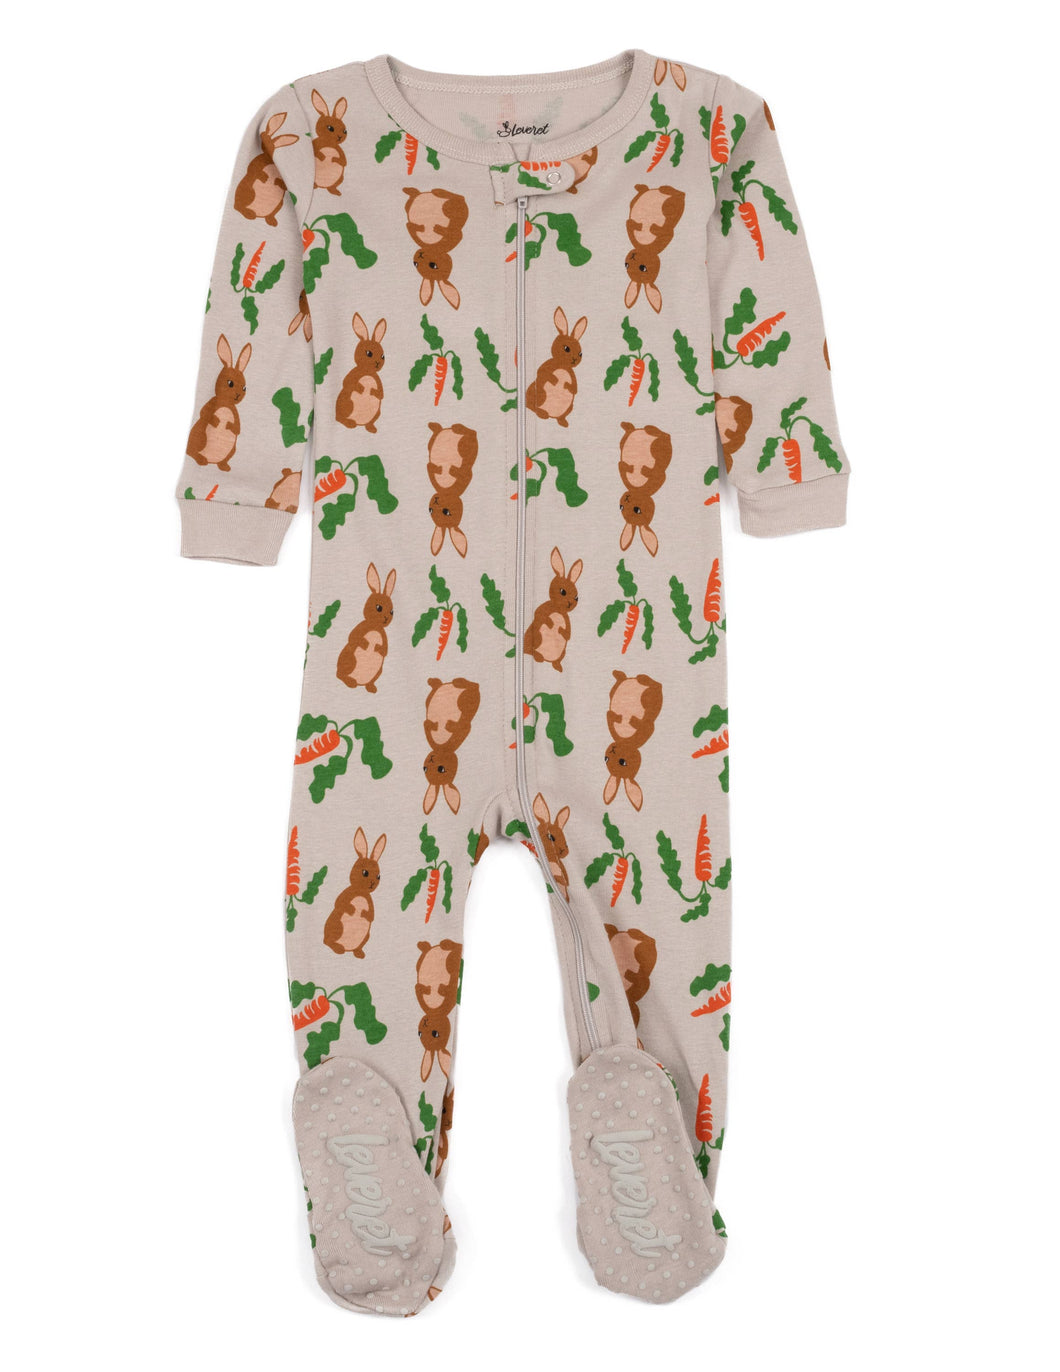 Leveret Pajamas - Kids Baby Footed Bunny Rabbit Pajamas for Easter: 0-3 months